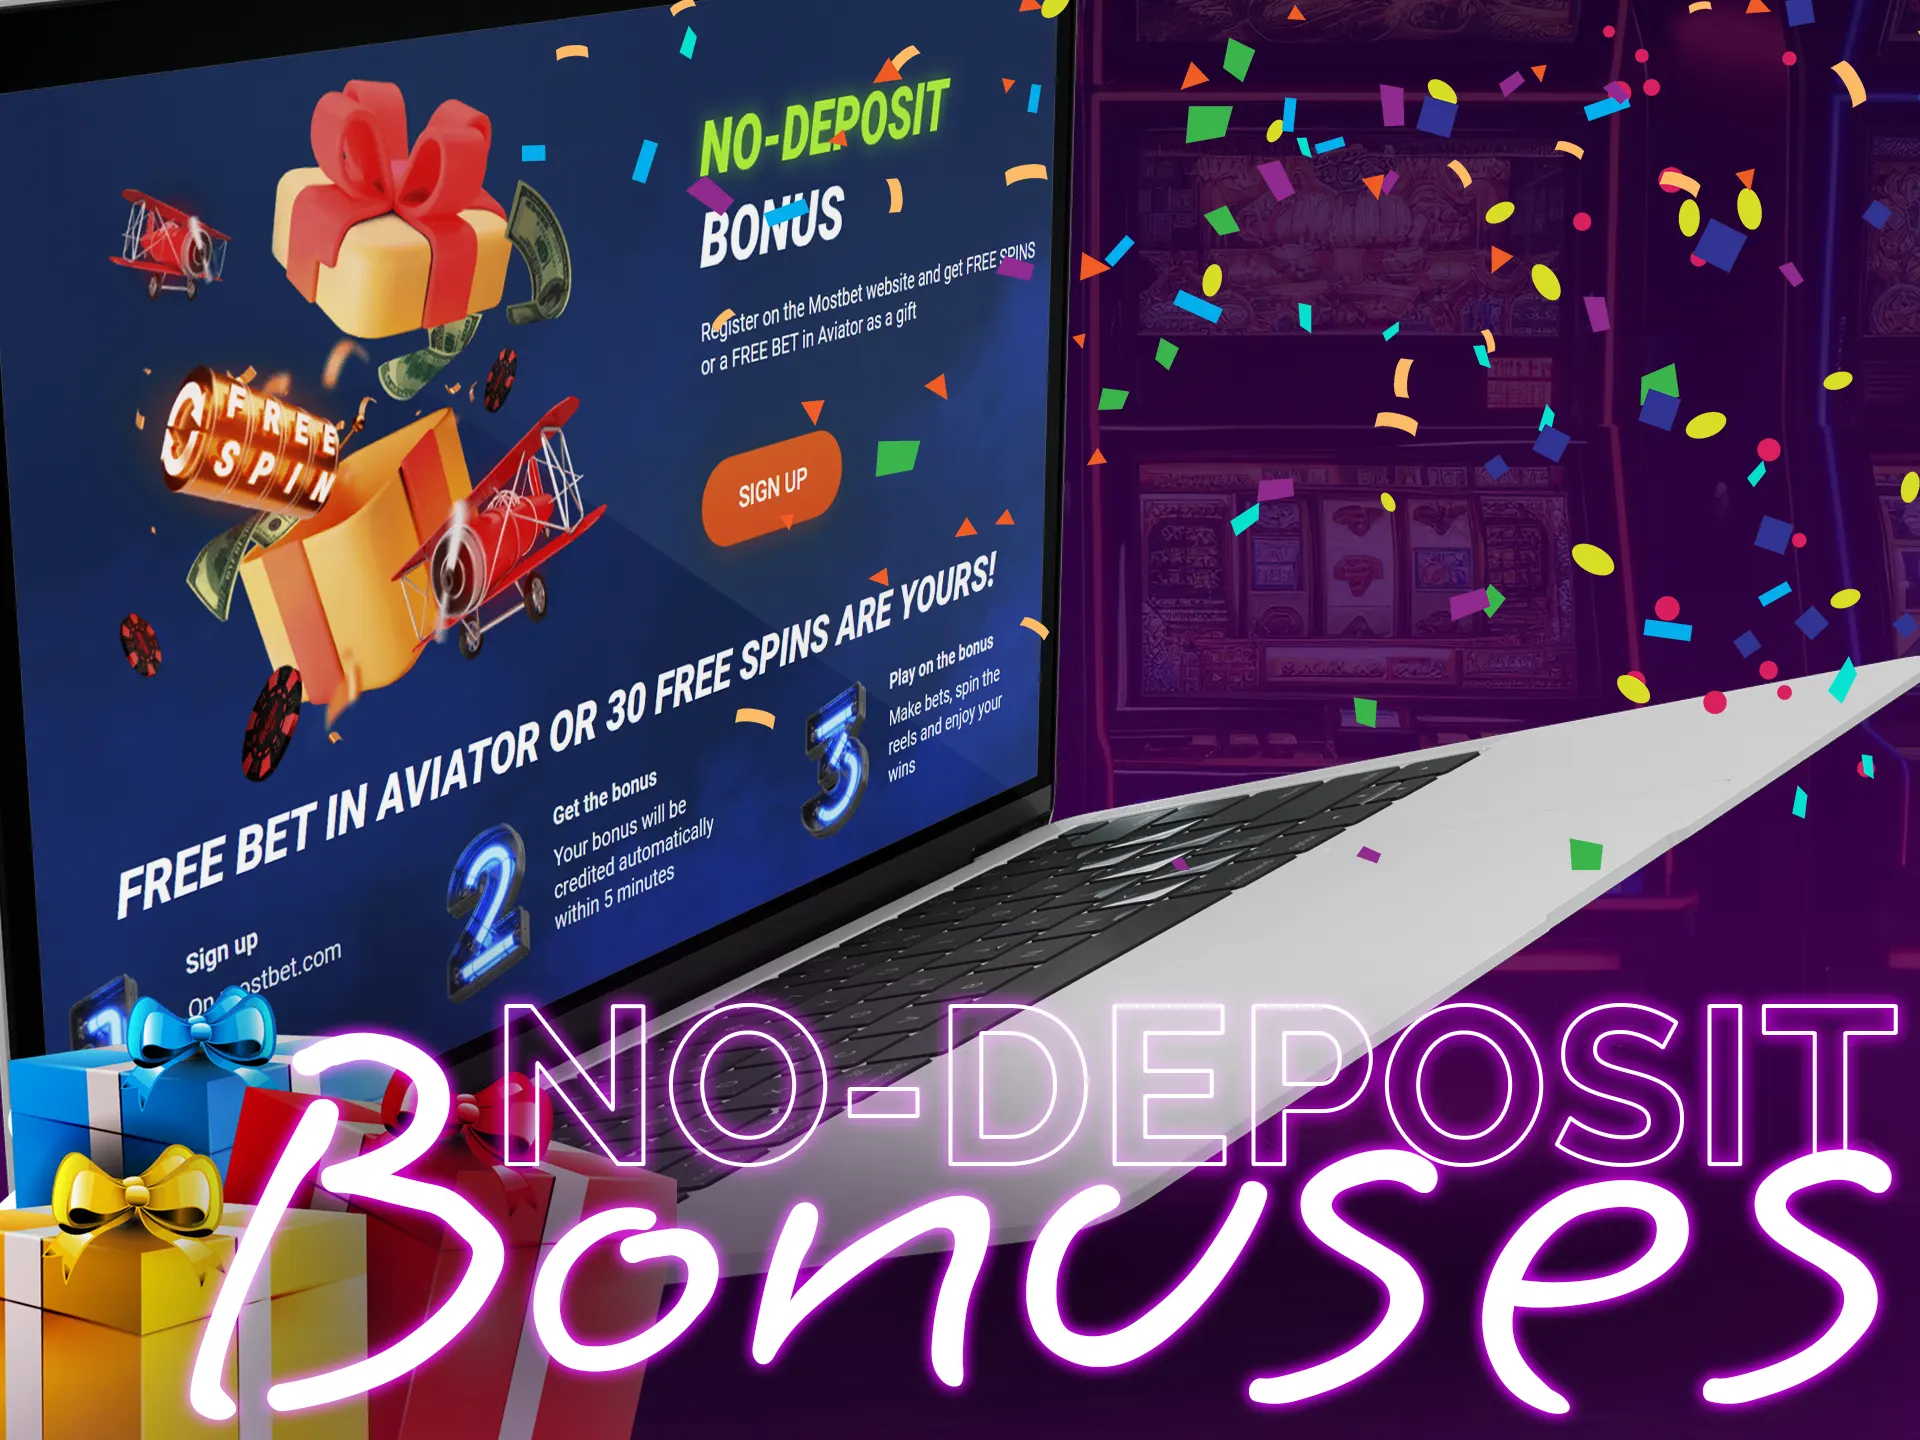 Get money for slots with no-deposit bonuses!